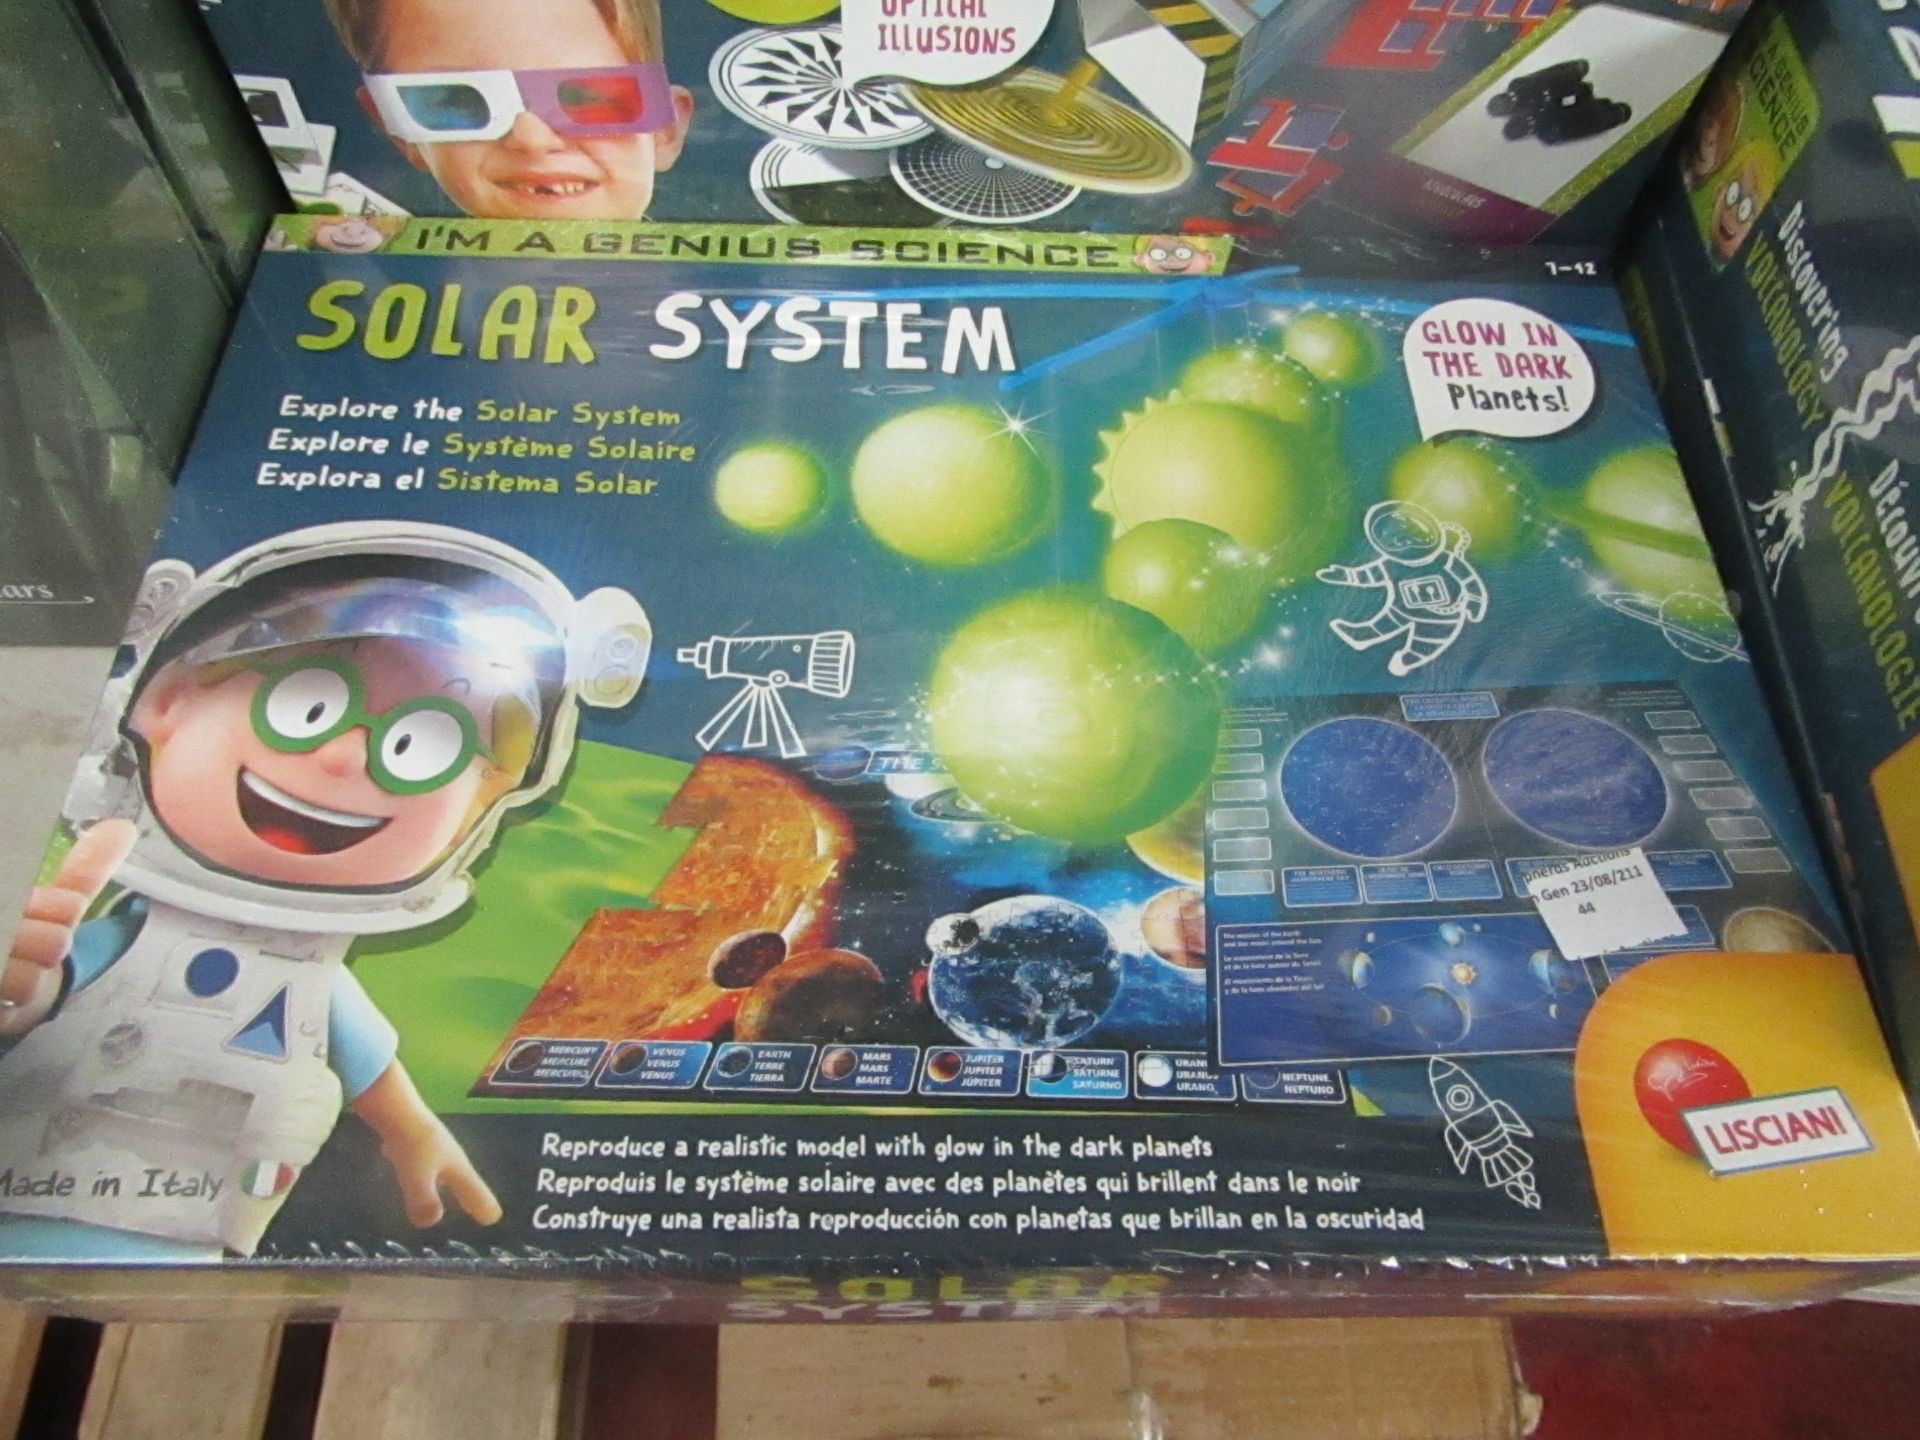 Lisciani - Im A Genius Science Solar System Science Activity Set - New & Boxed.